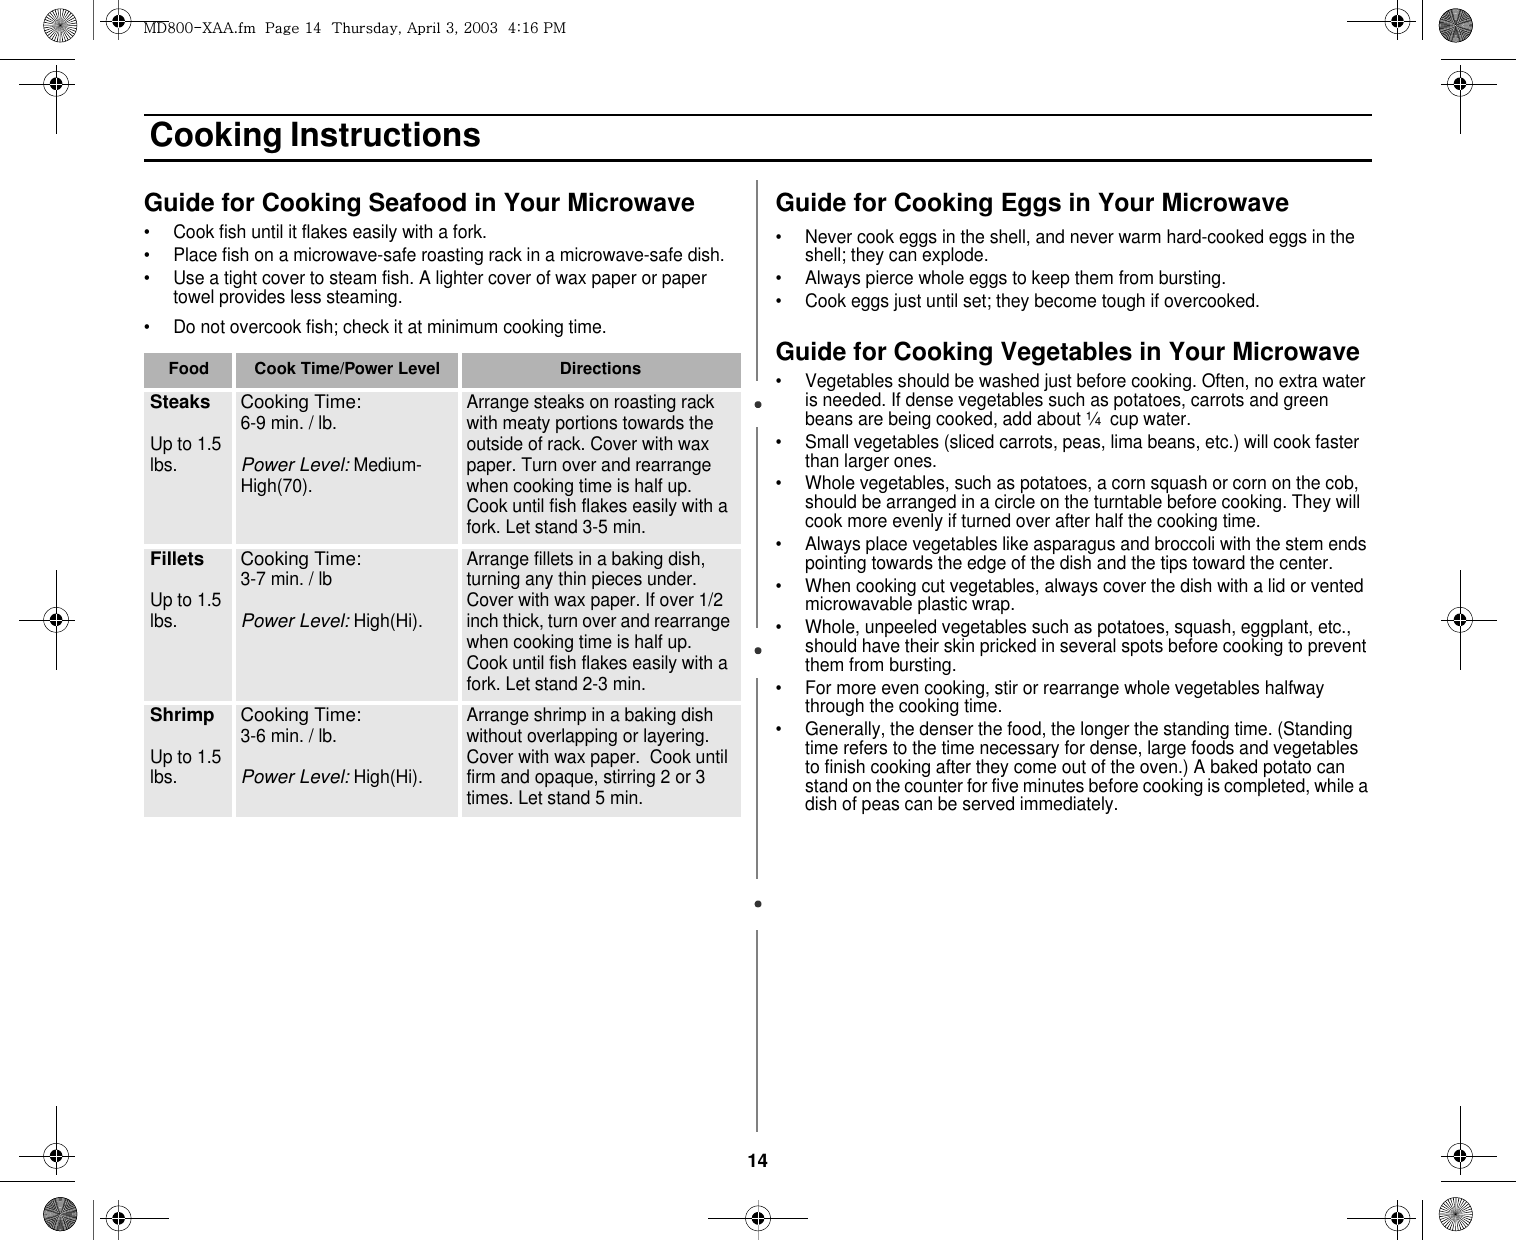 14 Cooking InstructionsGuide for Cooking Seafood in Your Microwave• Cook fish until it flakes easily with a fork.• Place fish on a microwave-safe roasting rack in a microwave-safe dish. • Use a tight cover to steam fish. A lighter cover of wax paper or paper towel provides less steaming.• Do not overcook fish; check it at minimum cooking time.Guide for Cooking Eggs in Your Microwave• Never cook eggs in the shell, and never warm hard-cooked eggs in the shell; they can explode.• Always pierce whole eggs to keep them from bursting.• Cook eggs just until set; they become tough if overcooked.Guide for Cooking Vegetables in Your Microwave• Vegetables should be washed just before cooking. Often, no extra water is needed. If dense vegetables such as potatoes, carrots and green beans are being cooked, add about ¼  cup water.• Small vegetables (sliced carrots, peas, lima beans, etc.) will cook faster than larger ones.• Whole vegetables, such as potatoes, a corn squash or corn on the cob, should be arranged in a circle on the turntable before cooking. They will cook more evenly if turned over after half the cooking time.• Always place vegetables like asparagus and broccoli with the stem ends pointing towards the edge of the dish and the tips toward the center.• When cooking cut vegetables, always cover the dish with a lid or vented microwavable plastic wrap.  • Whole, unpeeled vegetables such as potatoes, squash, eggplant, etc., should have their skin pricked in several spots before cooking to prevent them from bursting.• For more even cooking, stir or rearrange whole vegetables halfway through the cooking time.• Generally, the denser the food, the longer the standing time. (Standing time refers to the time necessary for dense, large foods and vegetables to finish cooking after they come out of the oven.) A baked potato can stand on the counter for five minutes before cooking is completed, while a dish of peas can be served immediately.Food Cook Time/Power Level DirectionsSteaksUp to 1.5 lbs.Cooking Time: 6-9 min. / lb. Power Level: Medium-High(70).Arrange steaks on roasting rack with meaty portions towards the outside of rack. Cover with wax paper. Turn over and rearrange when cooking time is half up. Cook until fish flakes easily with a fork. Let stand 3-5 min. FilletsUp to 1.5 lbs.Cooking Time: 3-7 min. / lbPower Level: High(Hi).Arrange fillets in a baking dish, turning any thin pieces under.  Cover with wax paper. If over 1/2 inch thick, turn over and rearrange when cooking time is half up. Cook until fish flakes easily with a fork. Let stand 2-3 min.ShrimpUp to 1.5 lbs.Cooking Time: 3-6 min. / lb.Power Level: High(Hi).Arrange shrimp in a baking dish without overlapping or layering.  Cover with wax paper.  Cook until firm and opaque, stirring 2 or 3 times. Let stand 5 min.tk_WWThhUGGwGX[GG{SGhGZSGYWWZGG[aX]Gwt